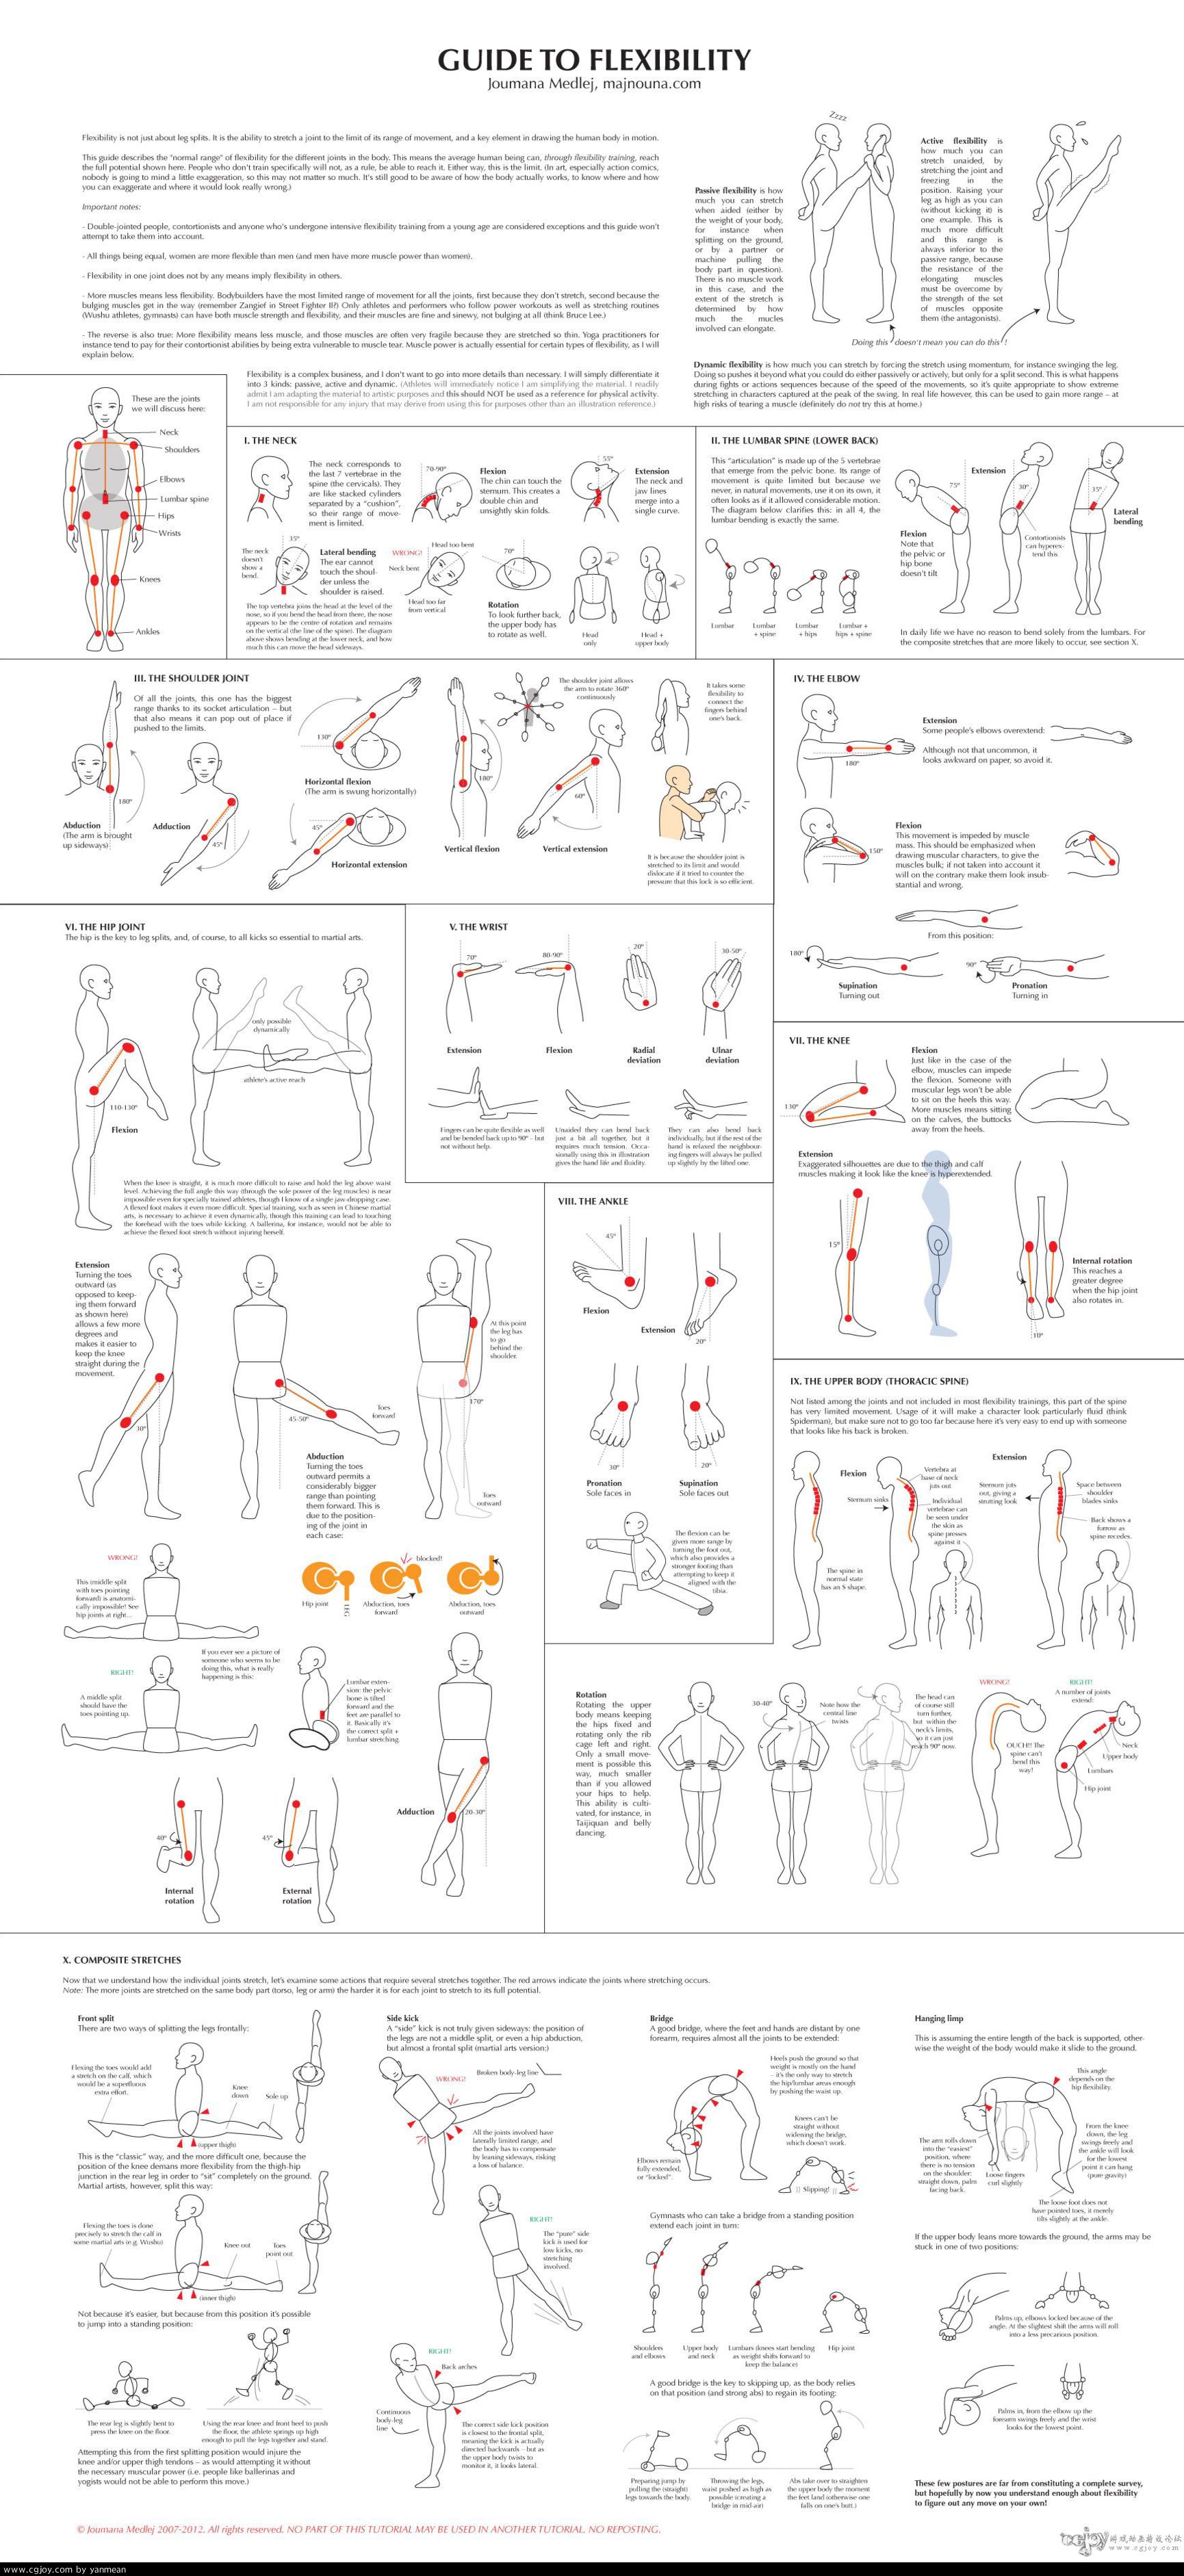 guide_to_movement1_flexibility_by_cedarseed-d13cuan.jpg